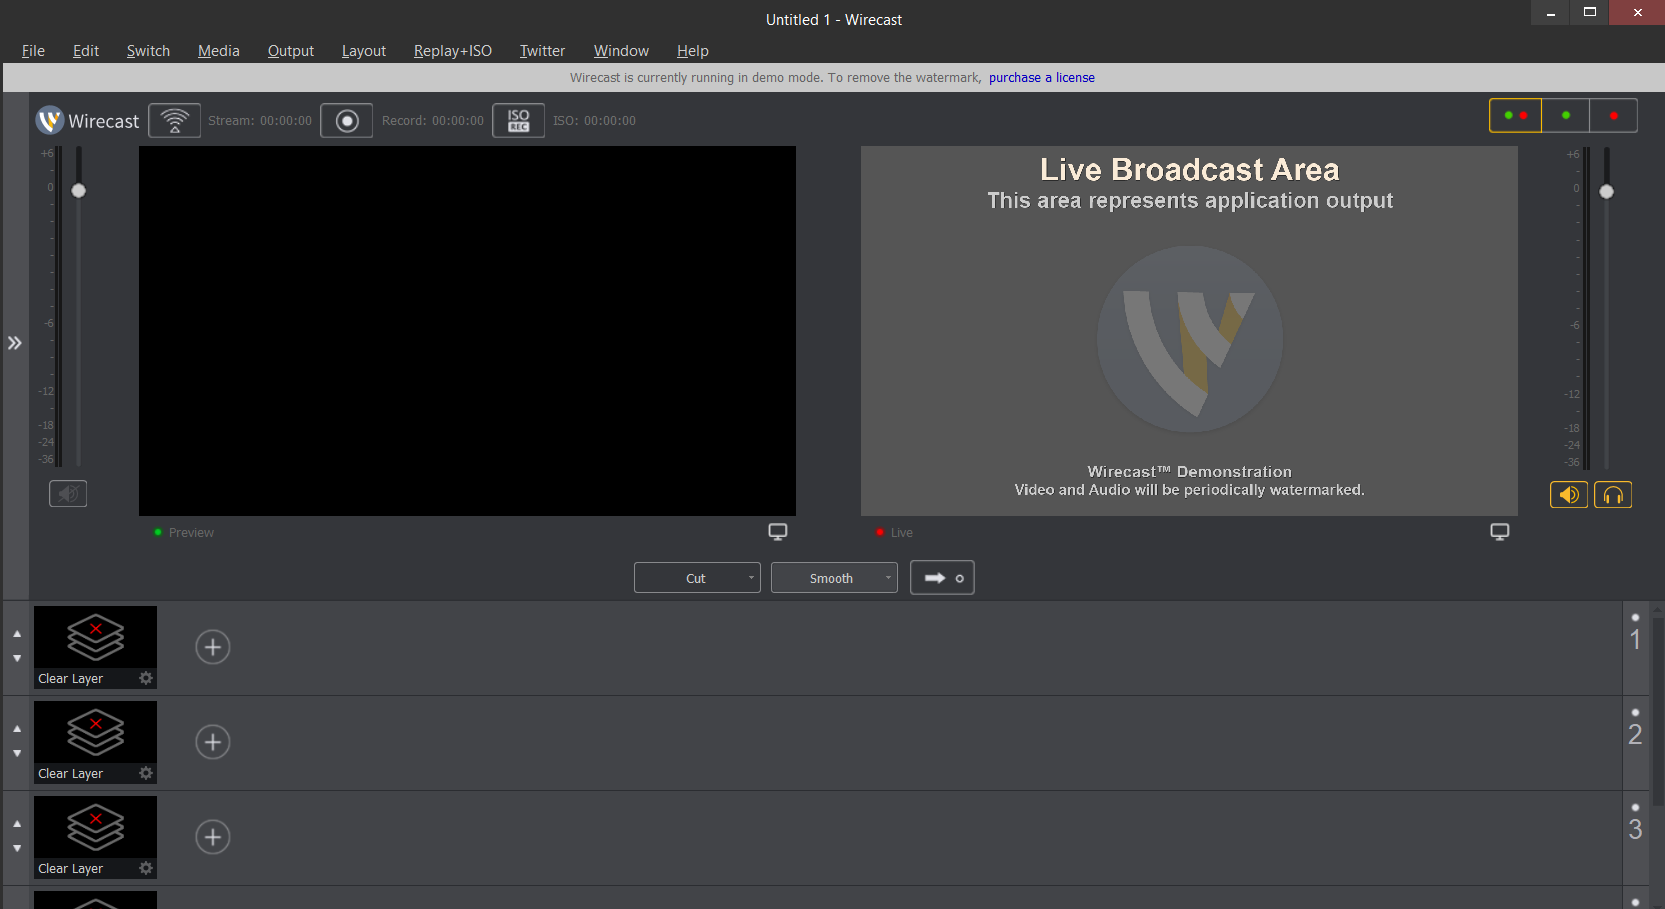 Image of the Wirecast start interface